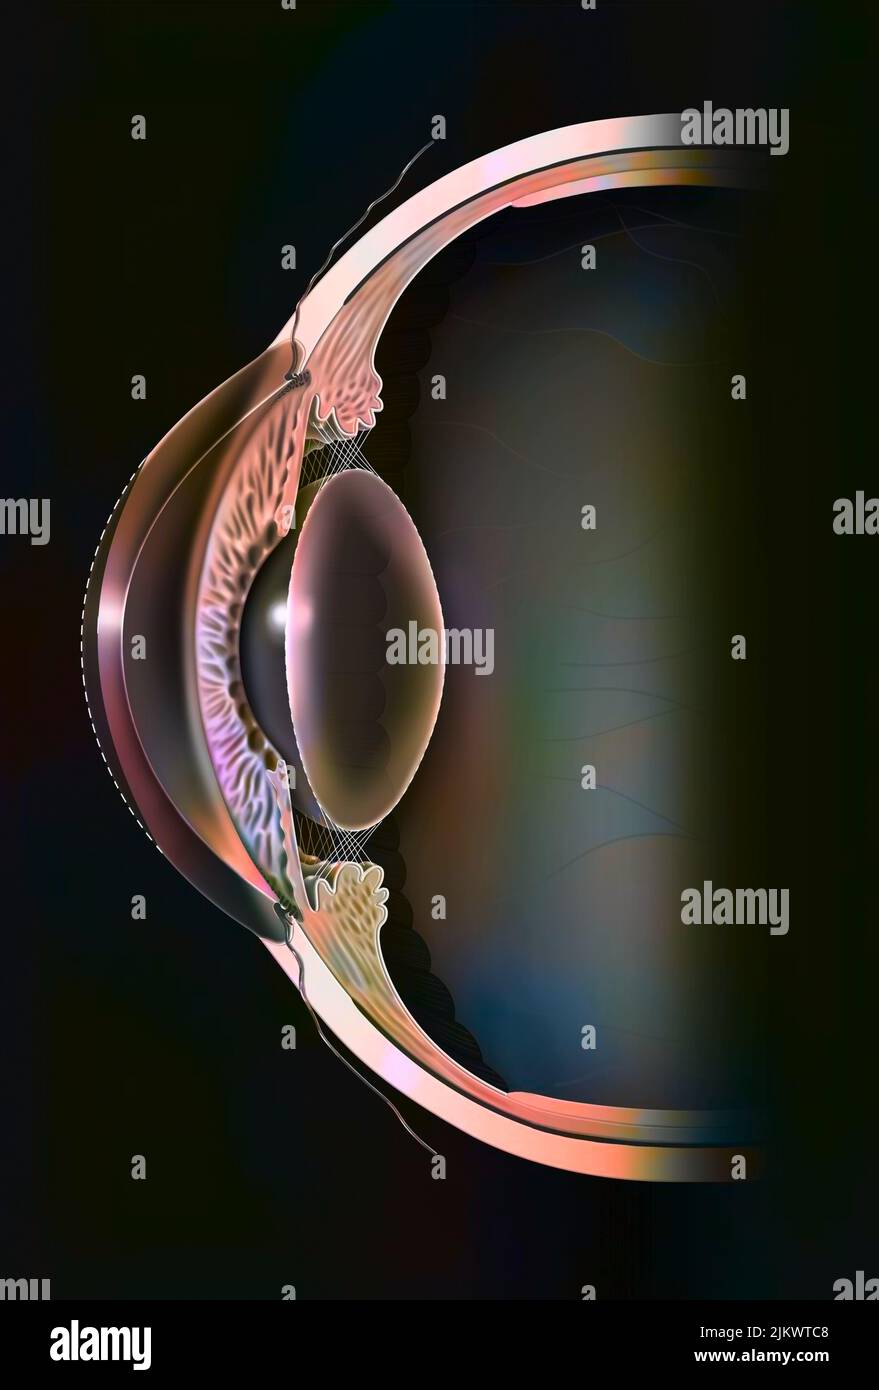 Astigmatic eye (ovoid and non-spherical cornea) inducing distorted vision. Stock Photo